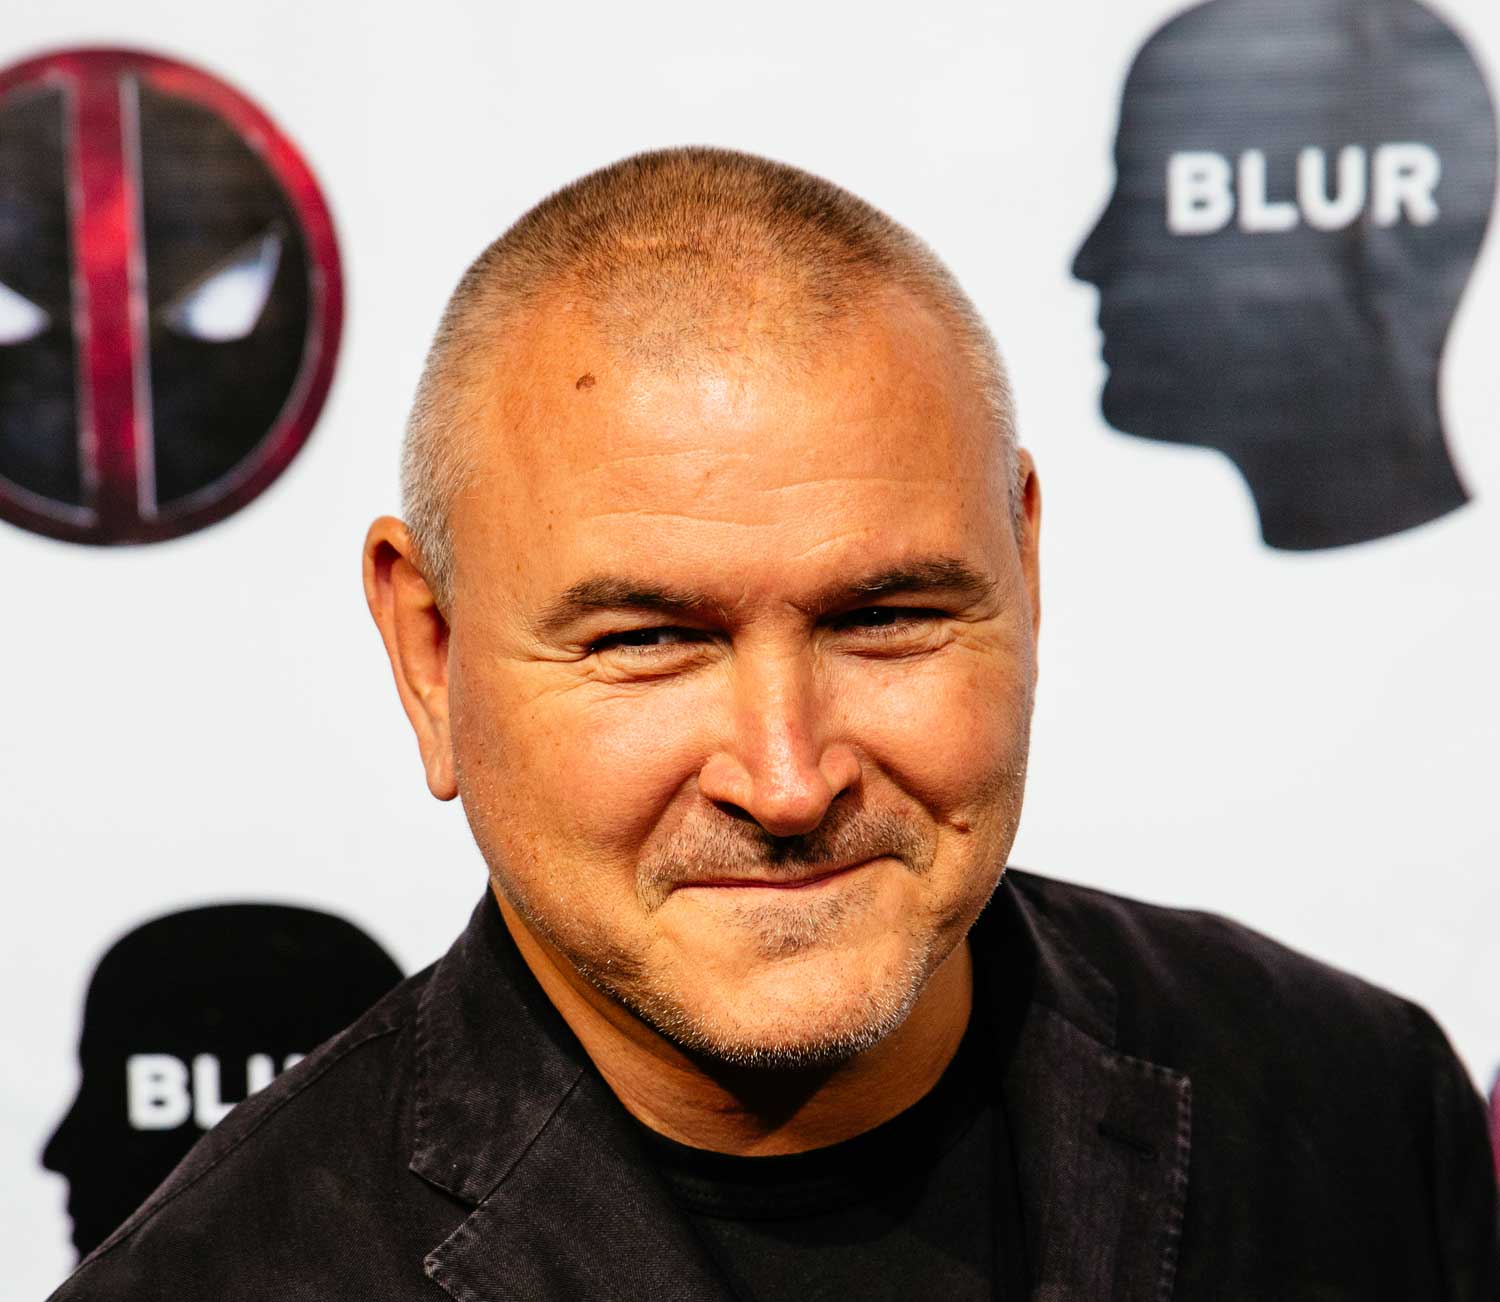 Blur's Tim Miller breaks box office records with Deadpool